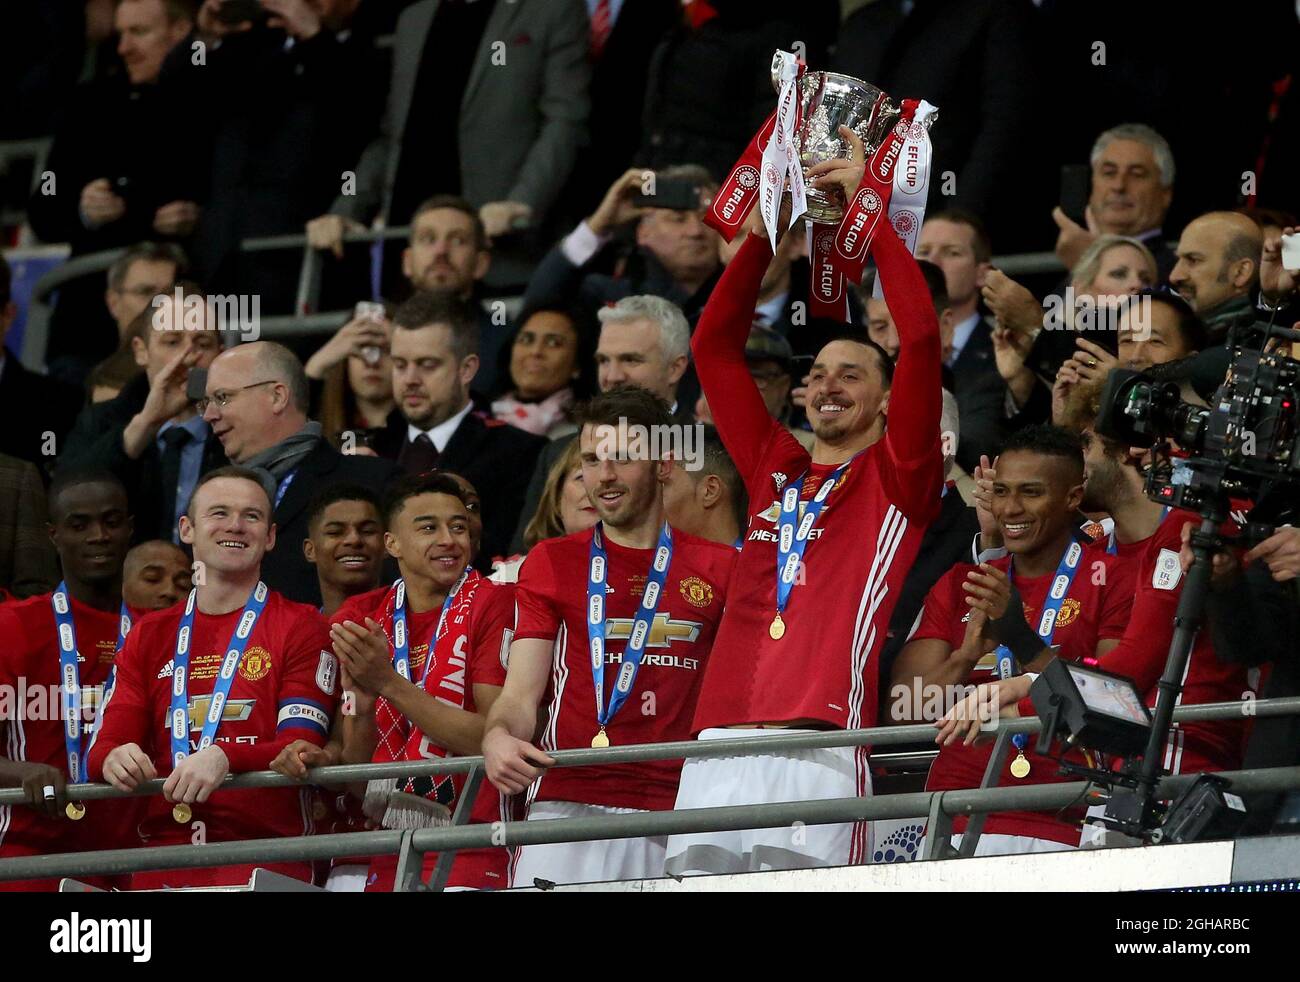 Zlatan Ibrahimovic of Manchester United lifts the EFL trophy during the English Football League Cup Final  match at the Wembley Stadium, London. Picture date: February 26th, 2017.Pic credit should read: David Klein/Sportimage via PA Images Stock Photo